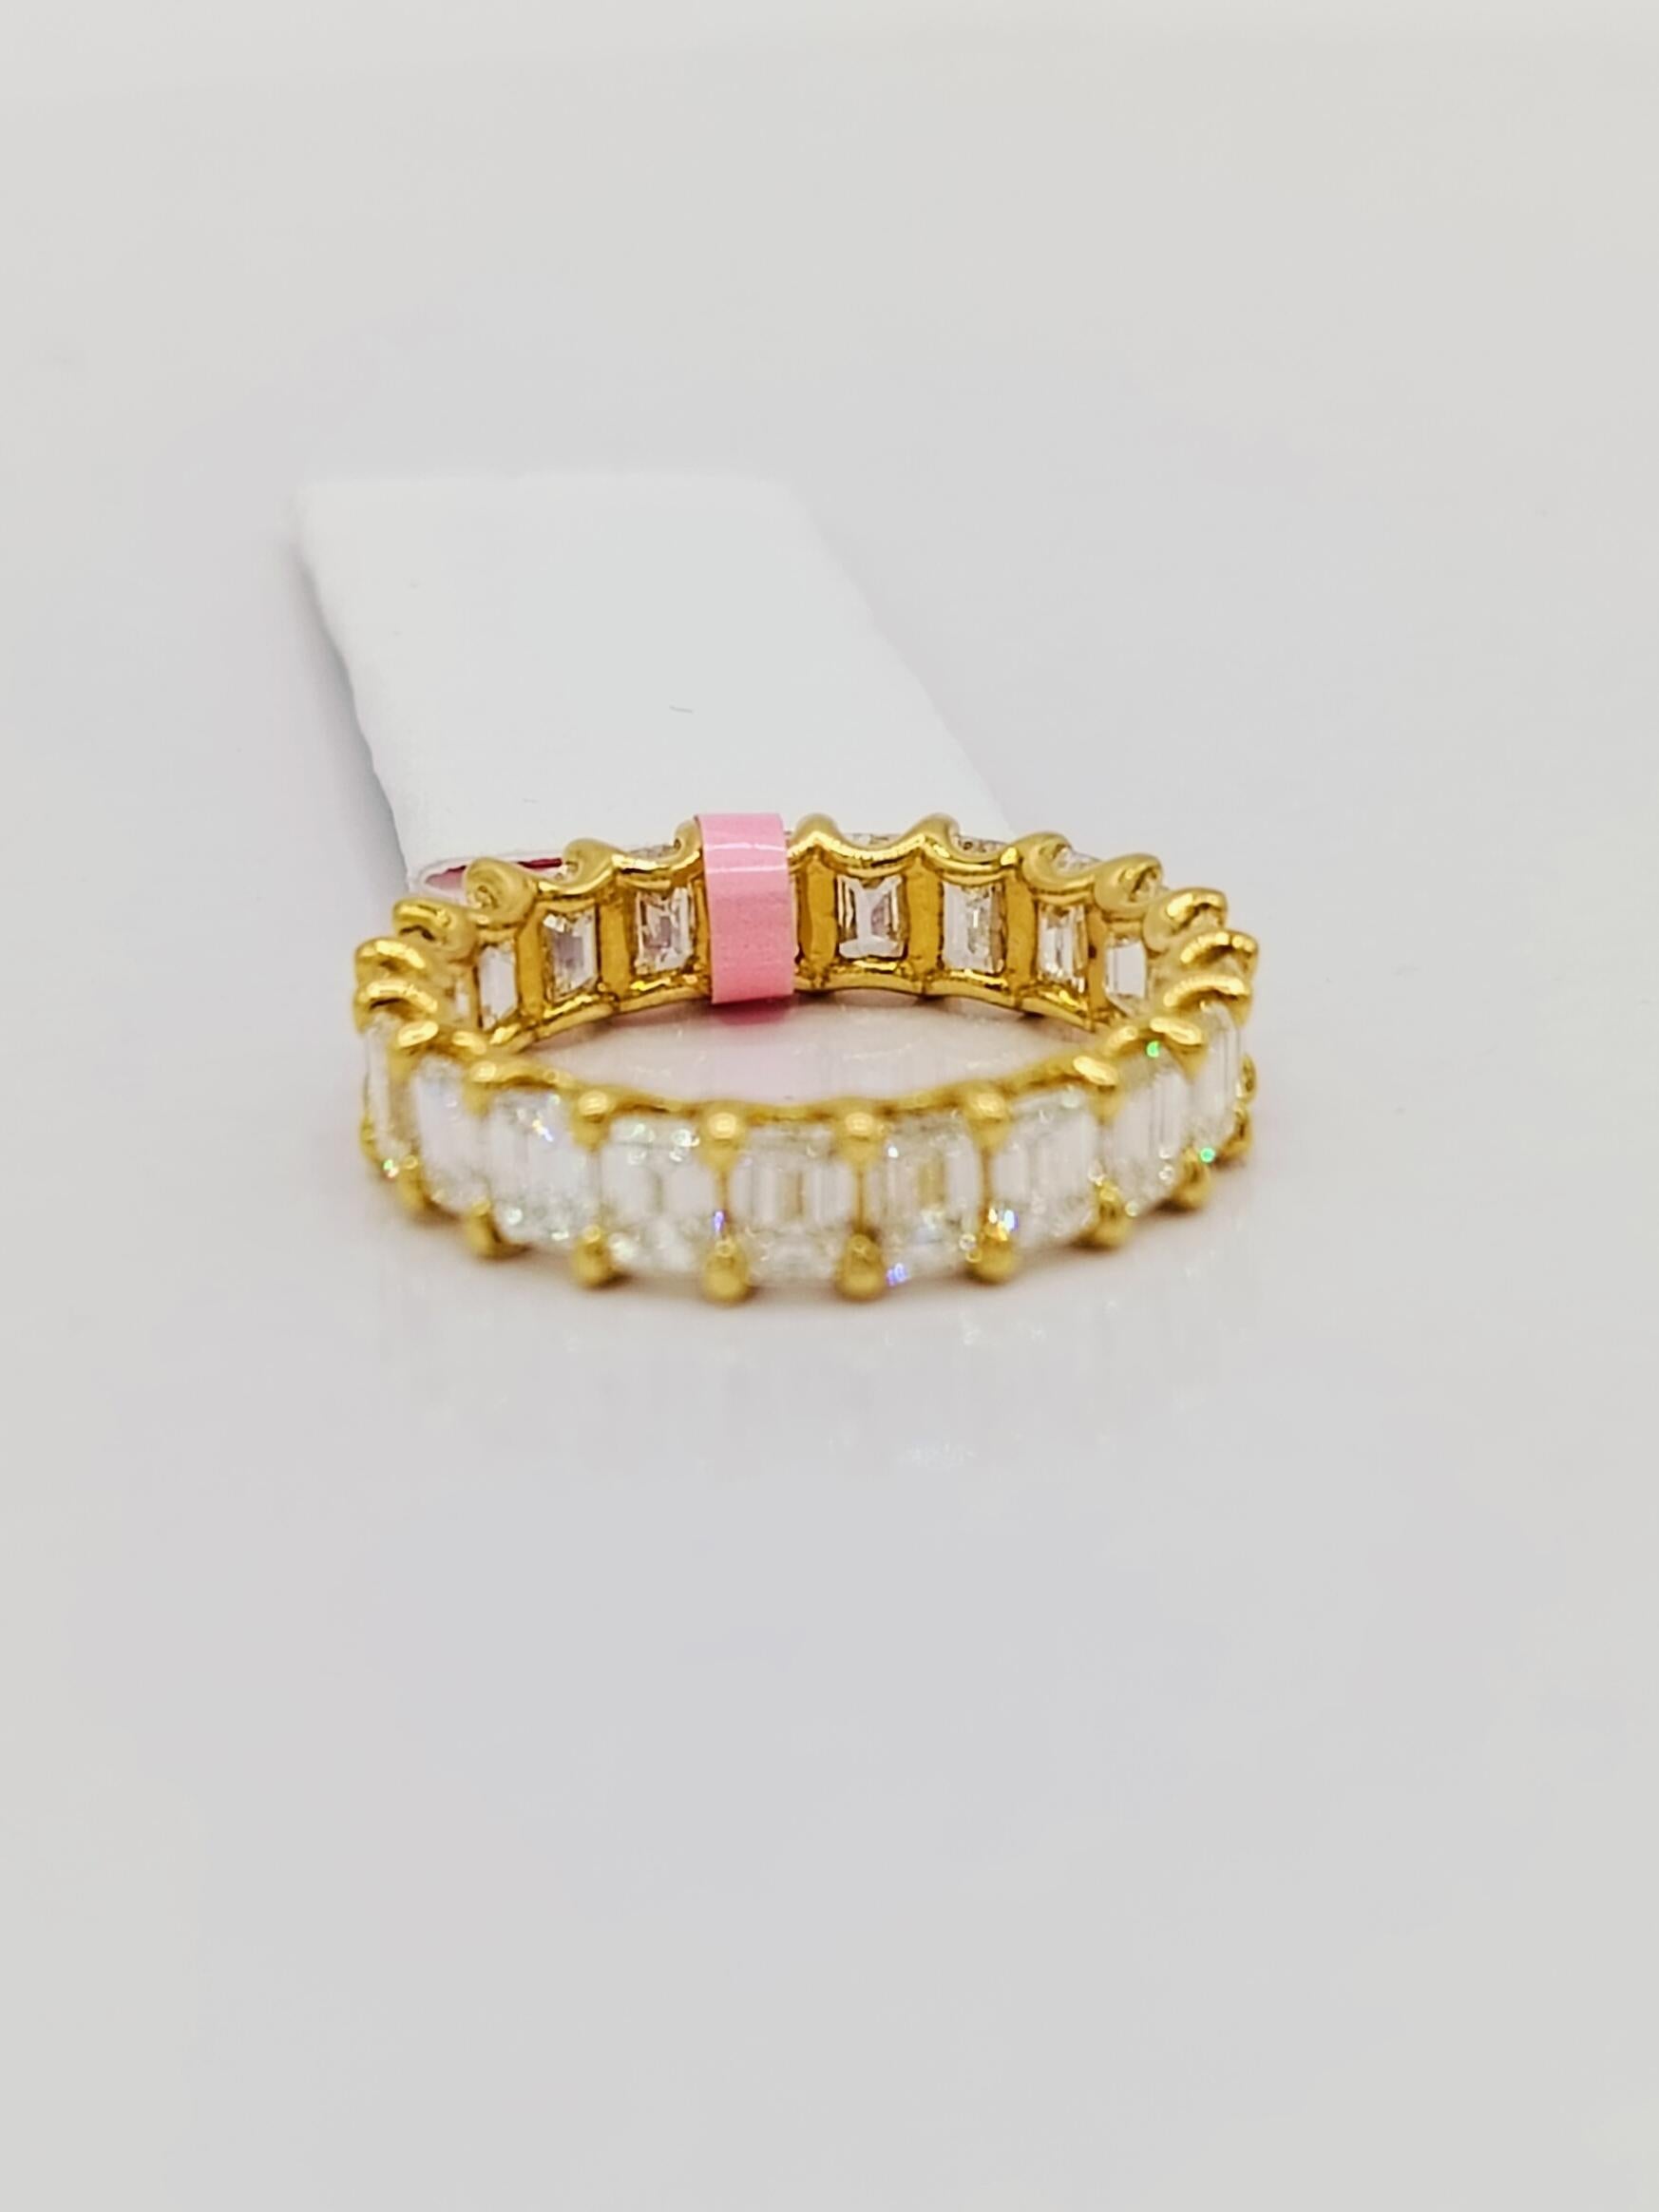 White Diamond Emerald Cut Eternity Band Ring in 18K Yellow Gold For Sale 1